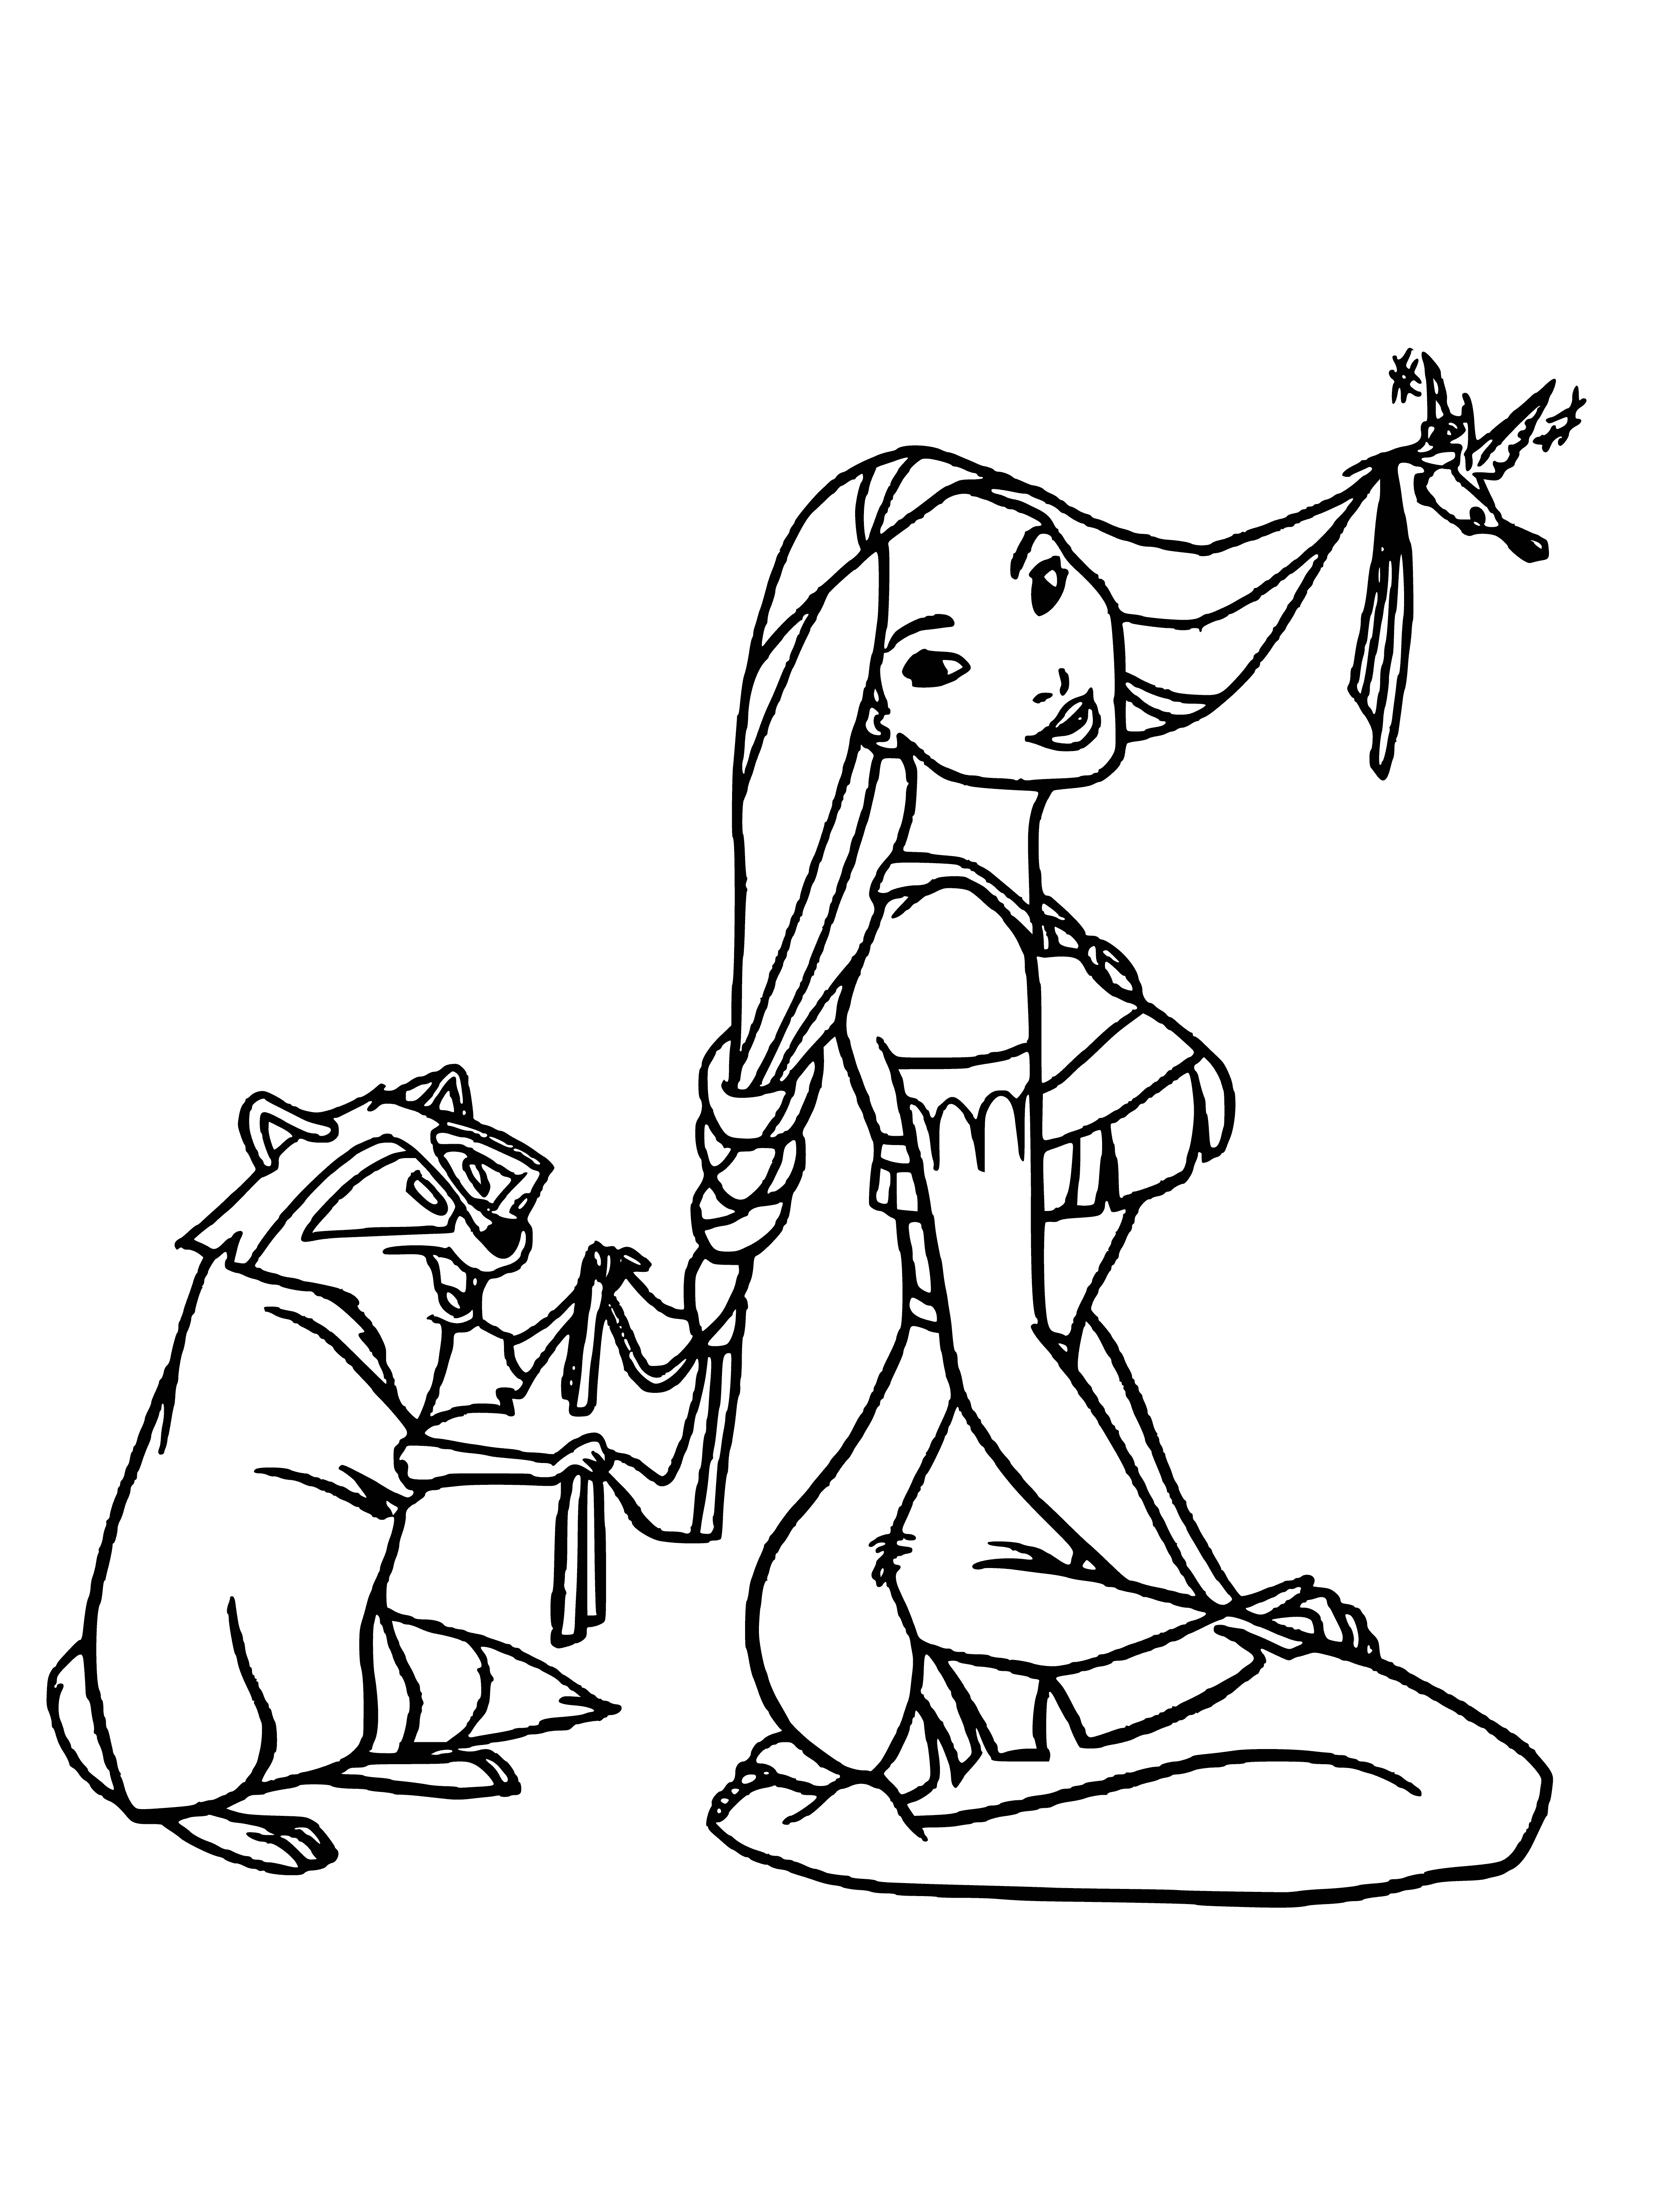 Pocahontas and Miko coloring page